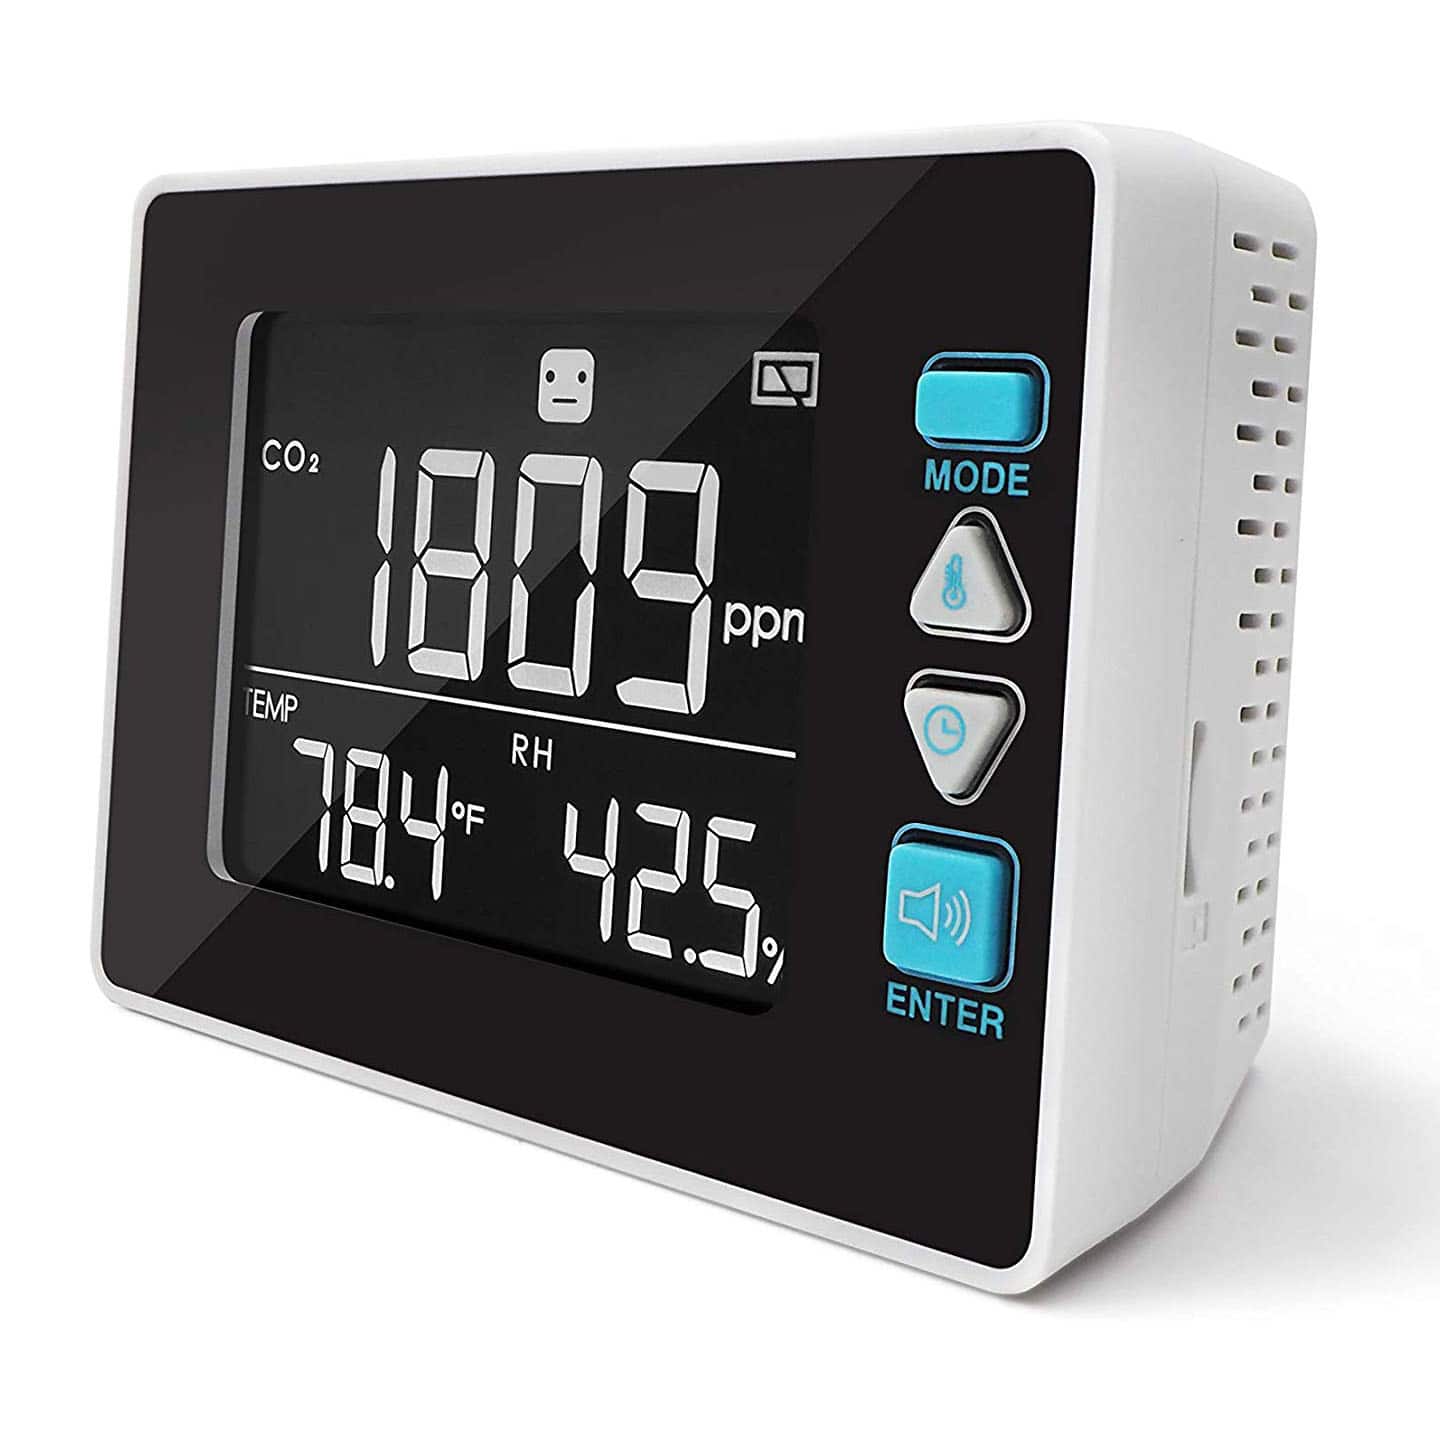 Top 10 Best Air Quality Monitors in 2022 Reviews Guide